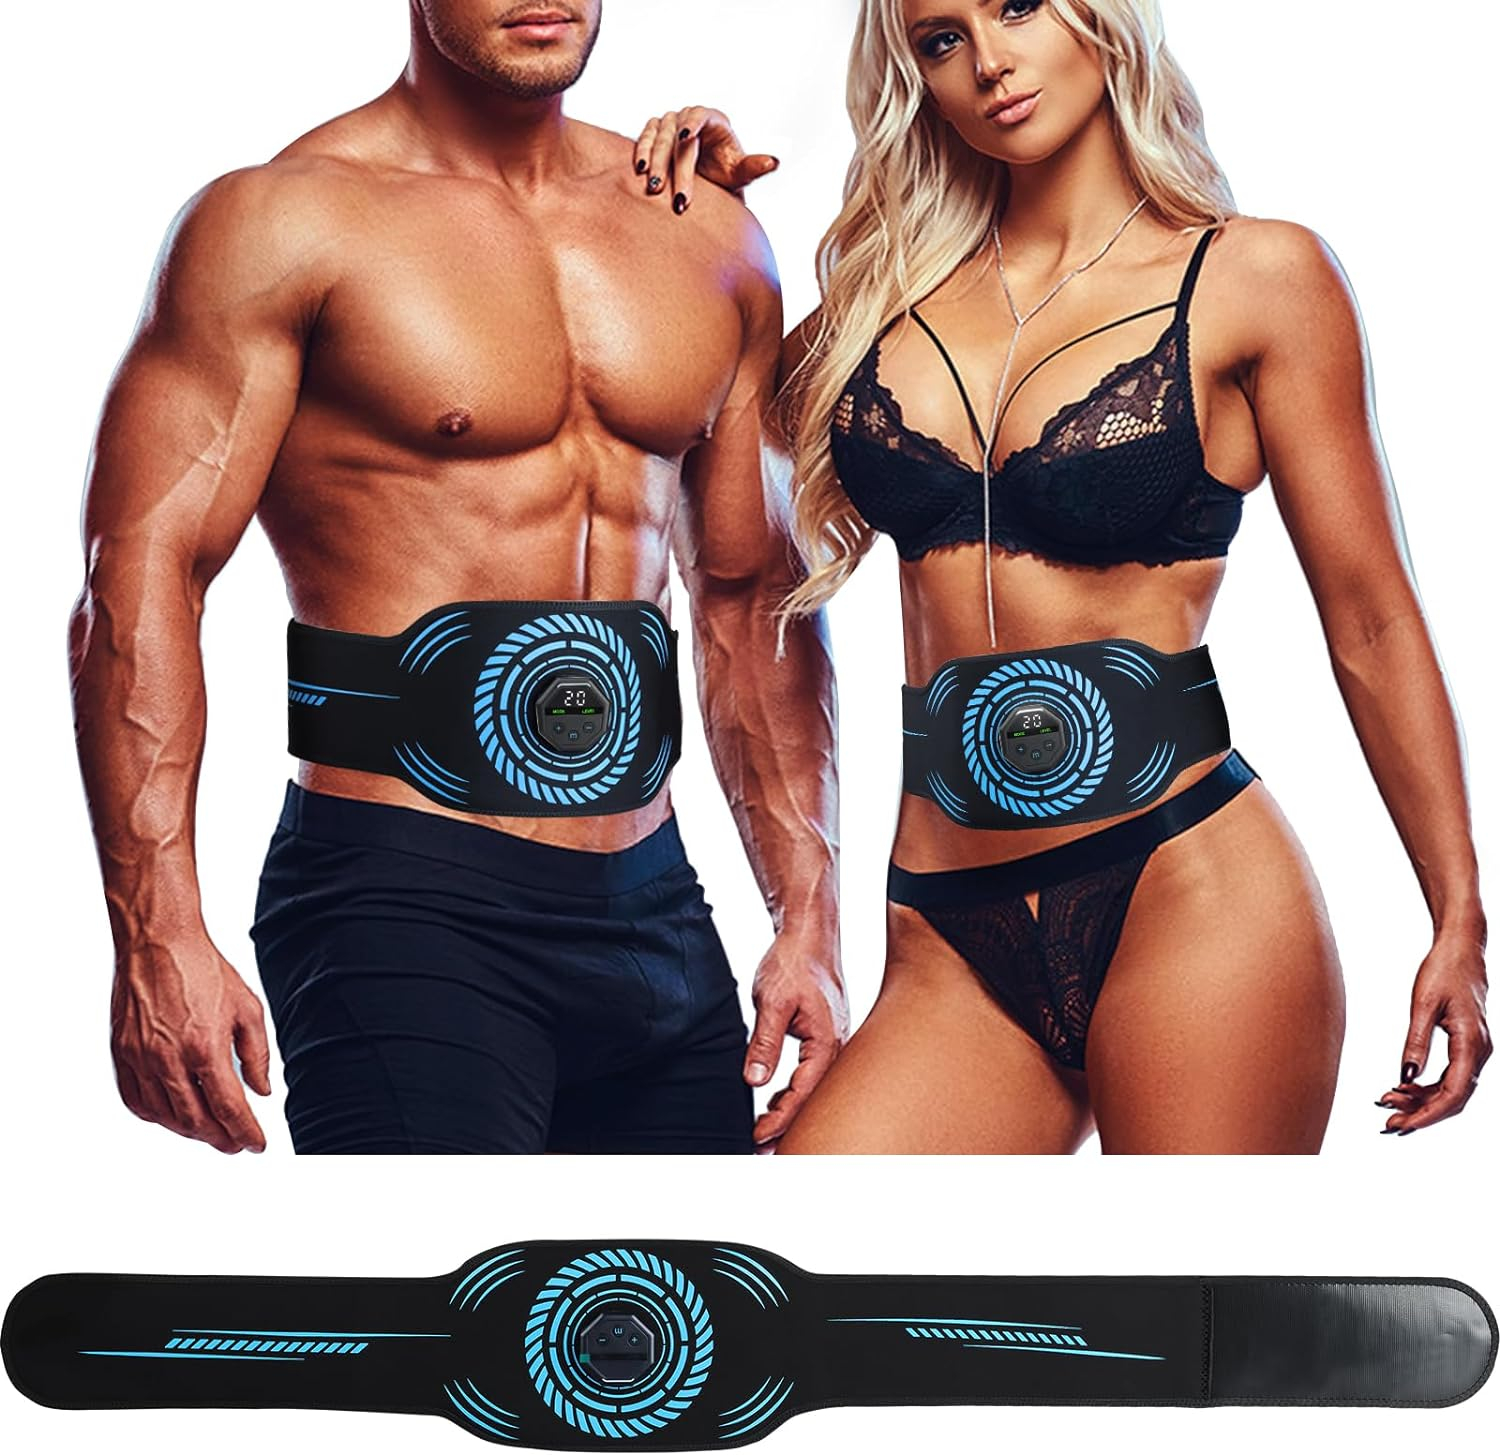 ABS Abdominal Toning Trainer, Haoyehome 10 modes Gym Equipment, Portable Ab Sport Exercise Belt, 20 Intensities Waist Trimmer Muscle Toner Fitness Training Gear Home Fitness Equipment For Men, Women